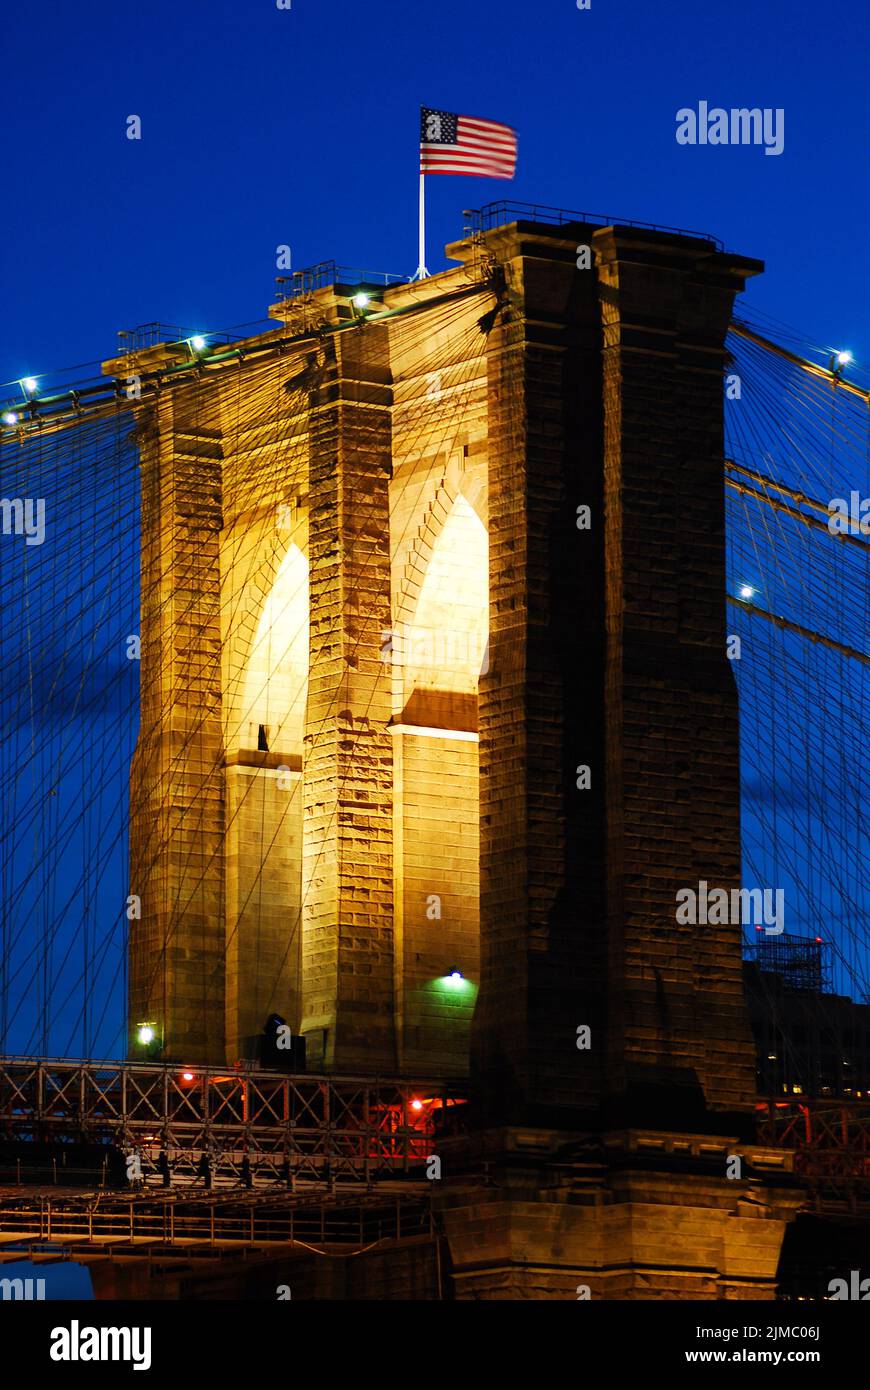 The Brooklyn Bridge is illuminated with special lights during a celebration at dusk in New York City Stock Photo